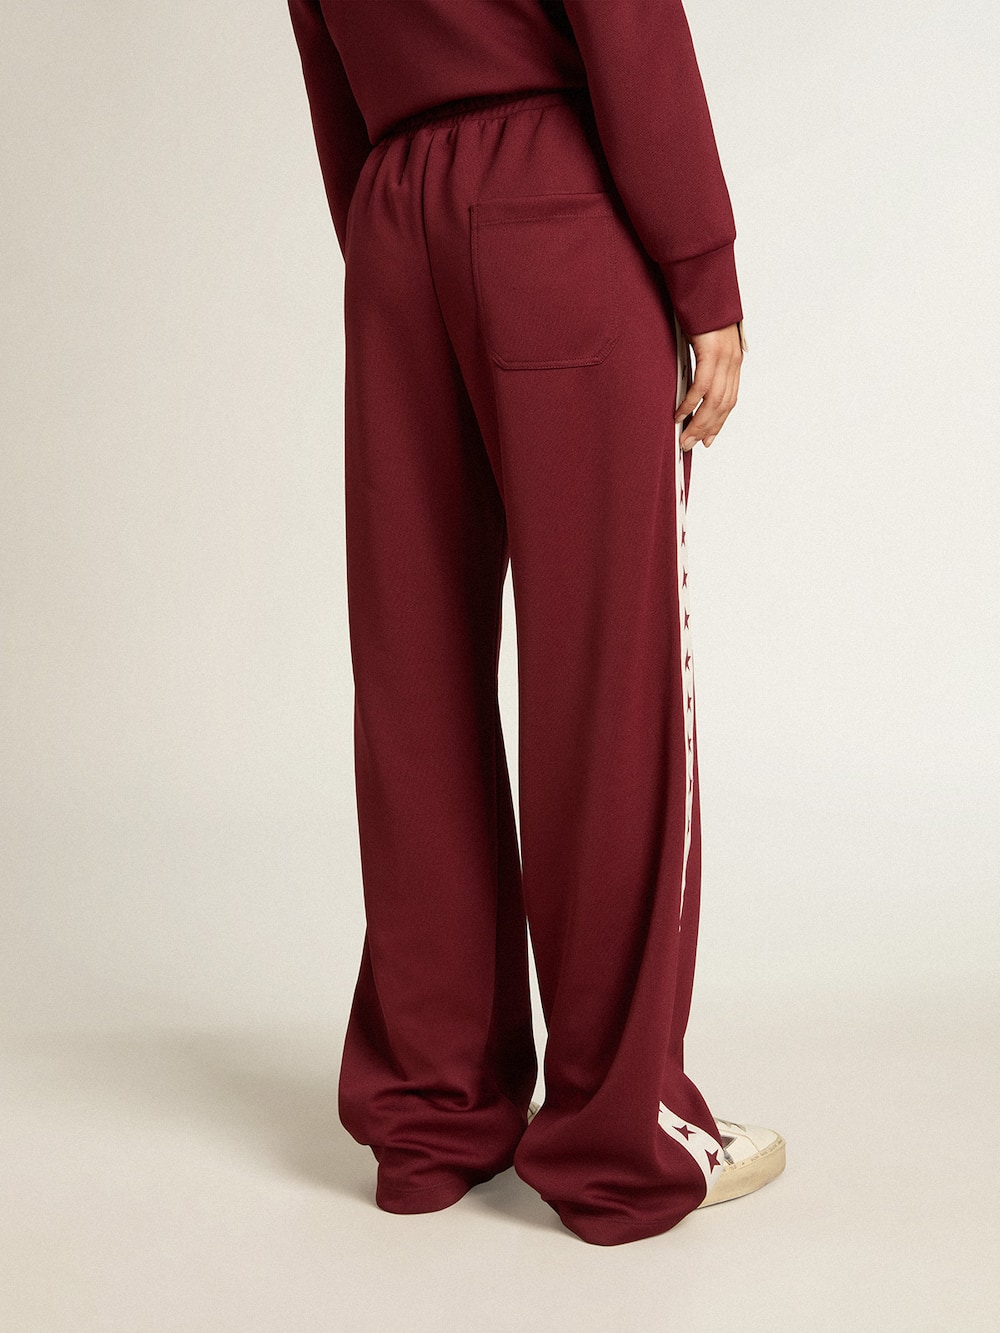 Golden Goose - Women’s burgundy joggers with stars on the sides in 